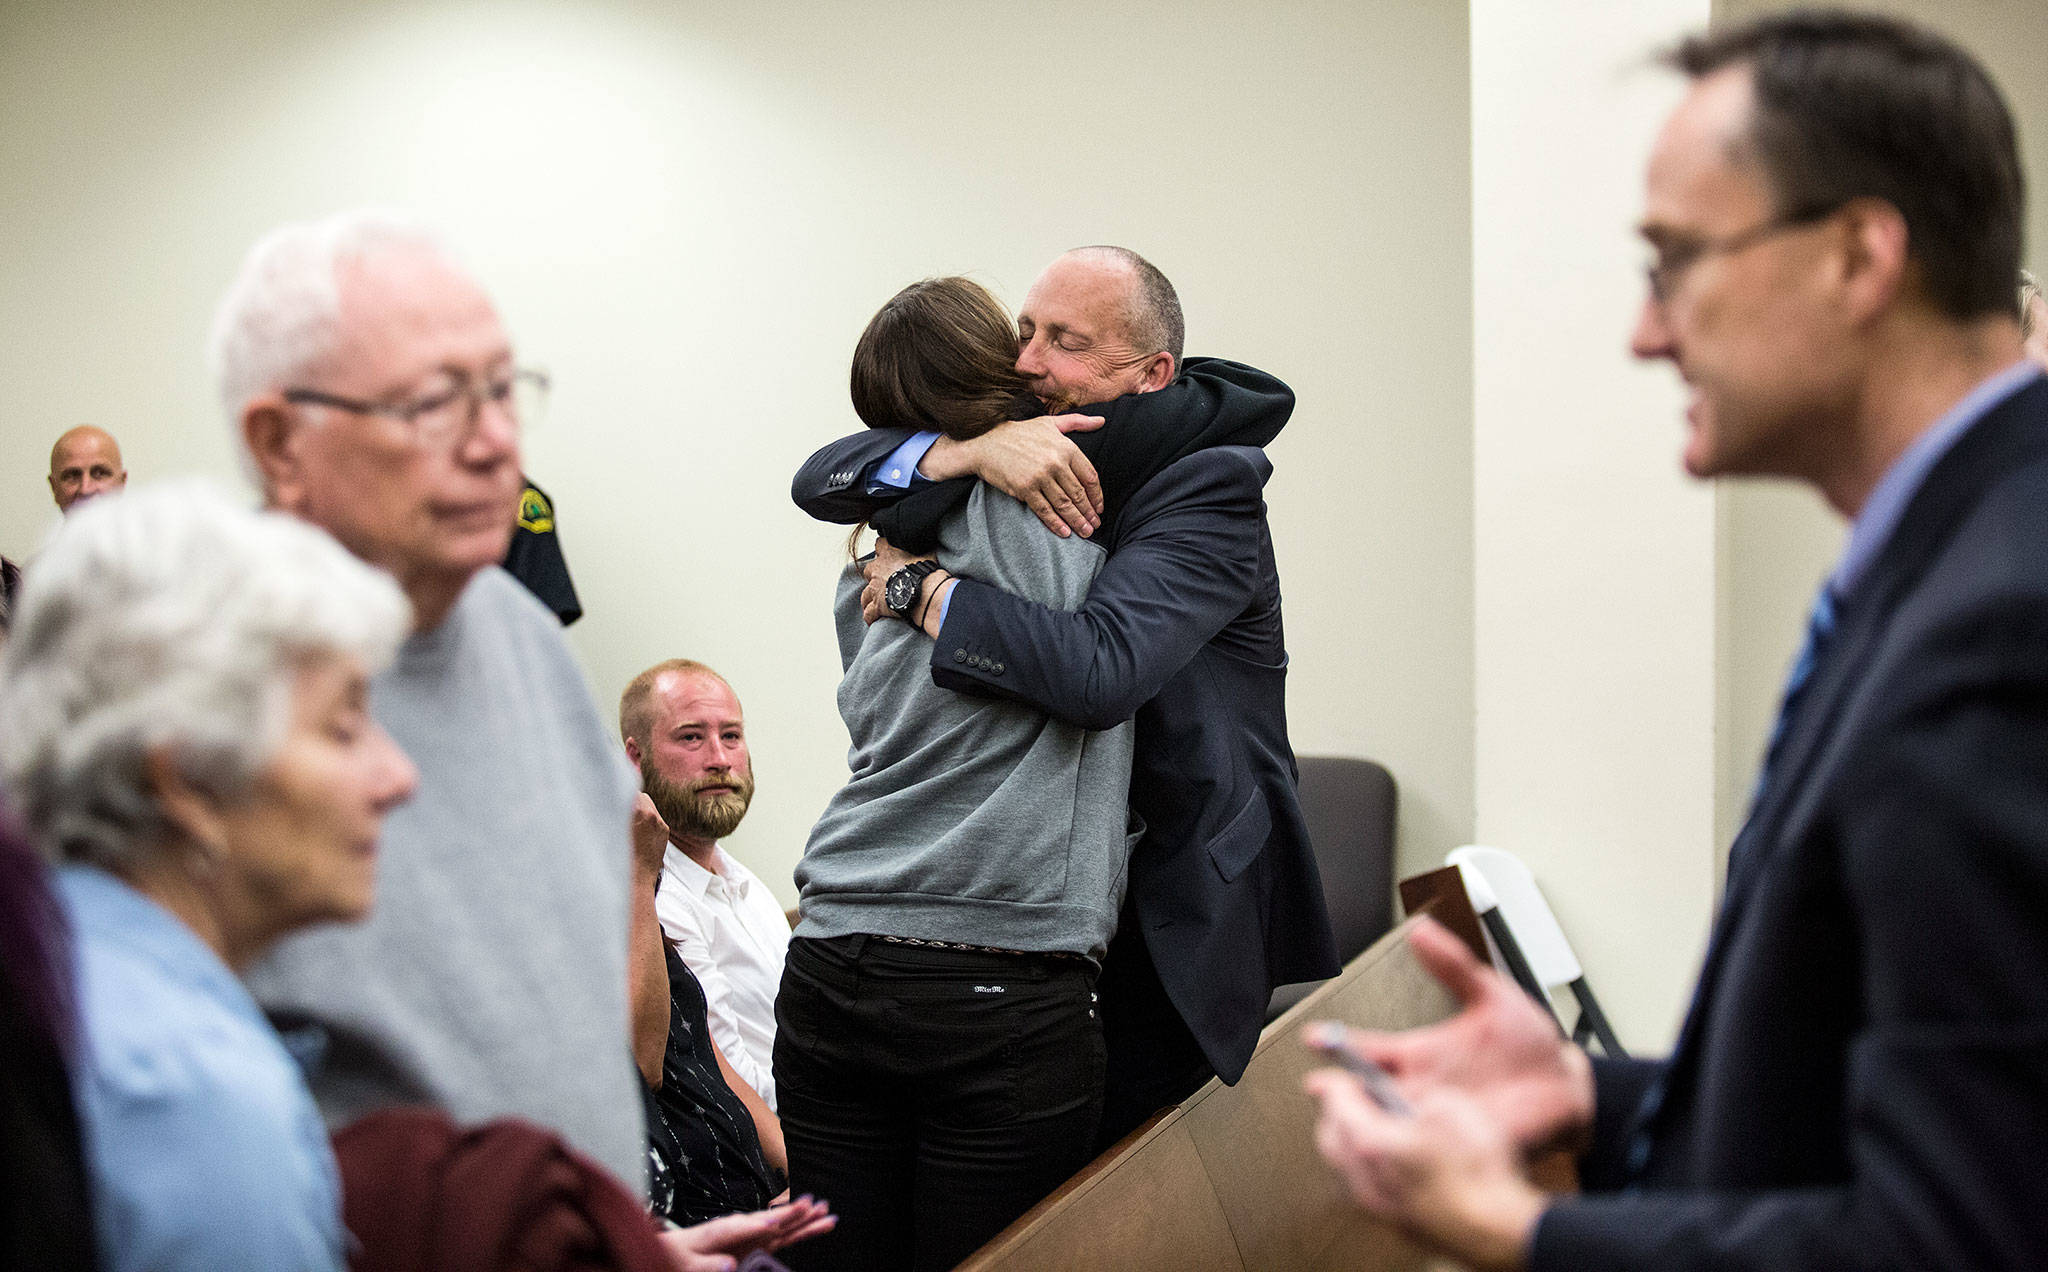 Snohomish County detective Dave Fontenot (center) is hugged as friends and family of Monique Patenaude and Patrick Shunn react to the guilty verdict for John Reed at the Snohomish County Courthouse on Wednesday in Everett. At right,Snohomish County chief criminal deputy prosecutor Craig Matheson talks with Shunn’s parents (left). (Andy Bronson / The Herald)